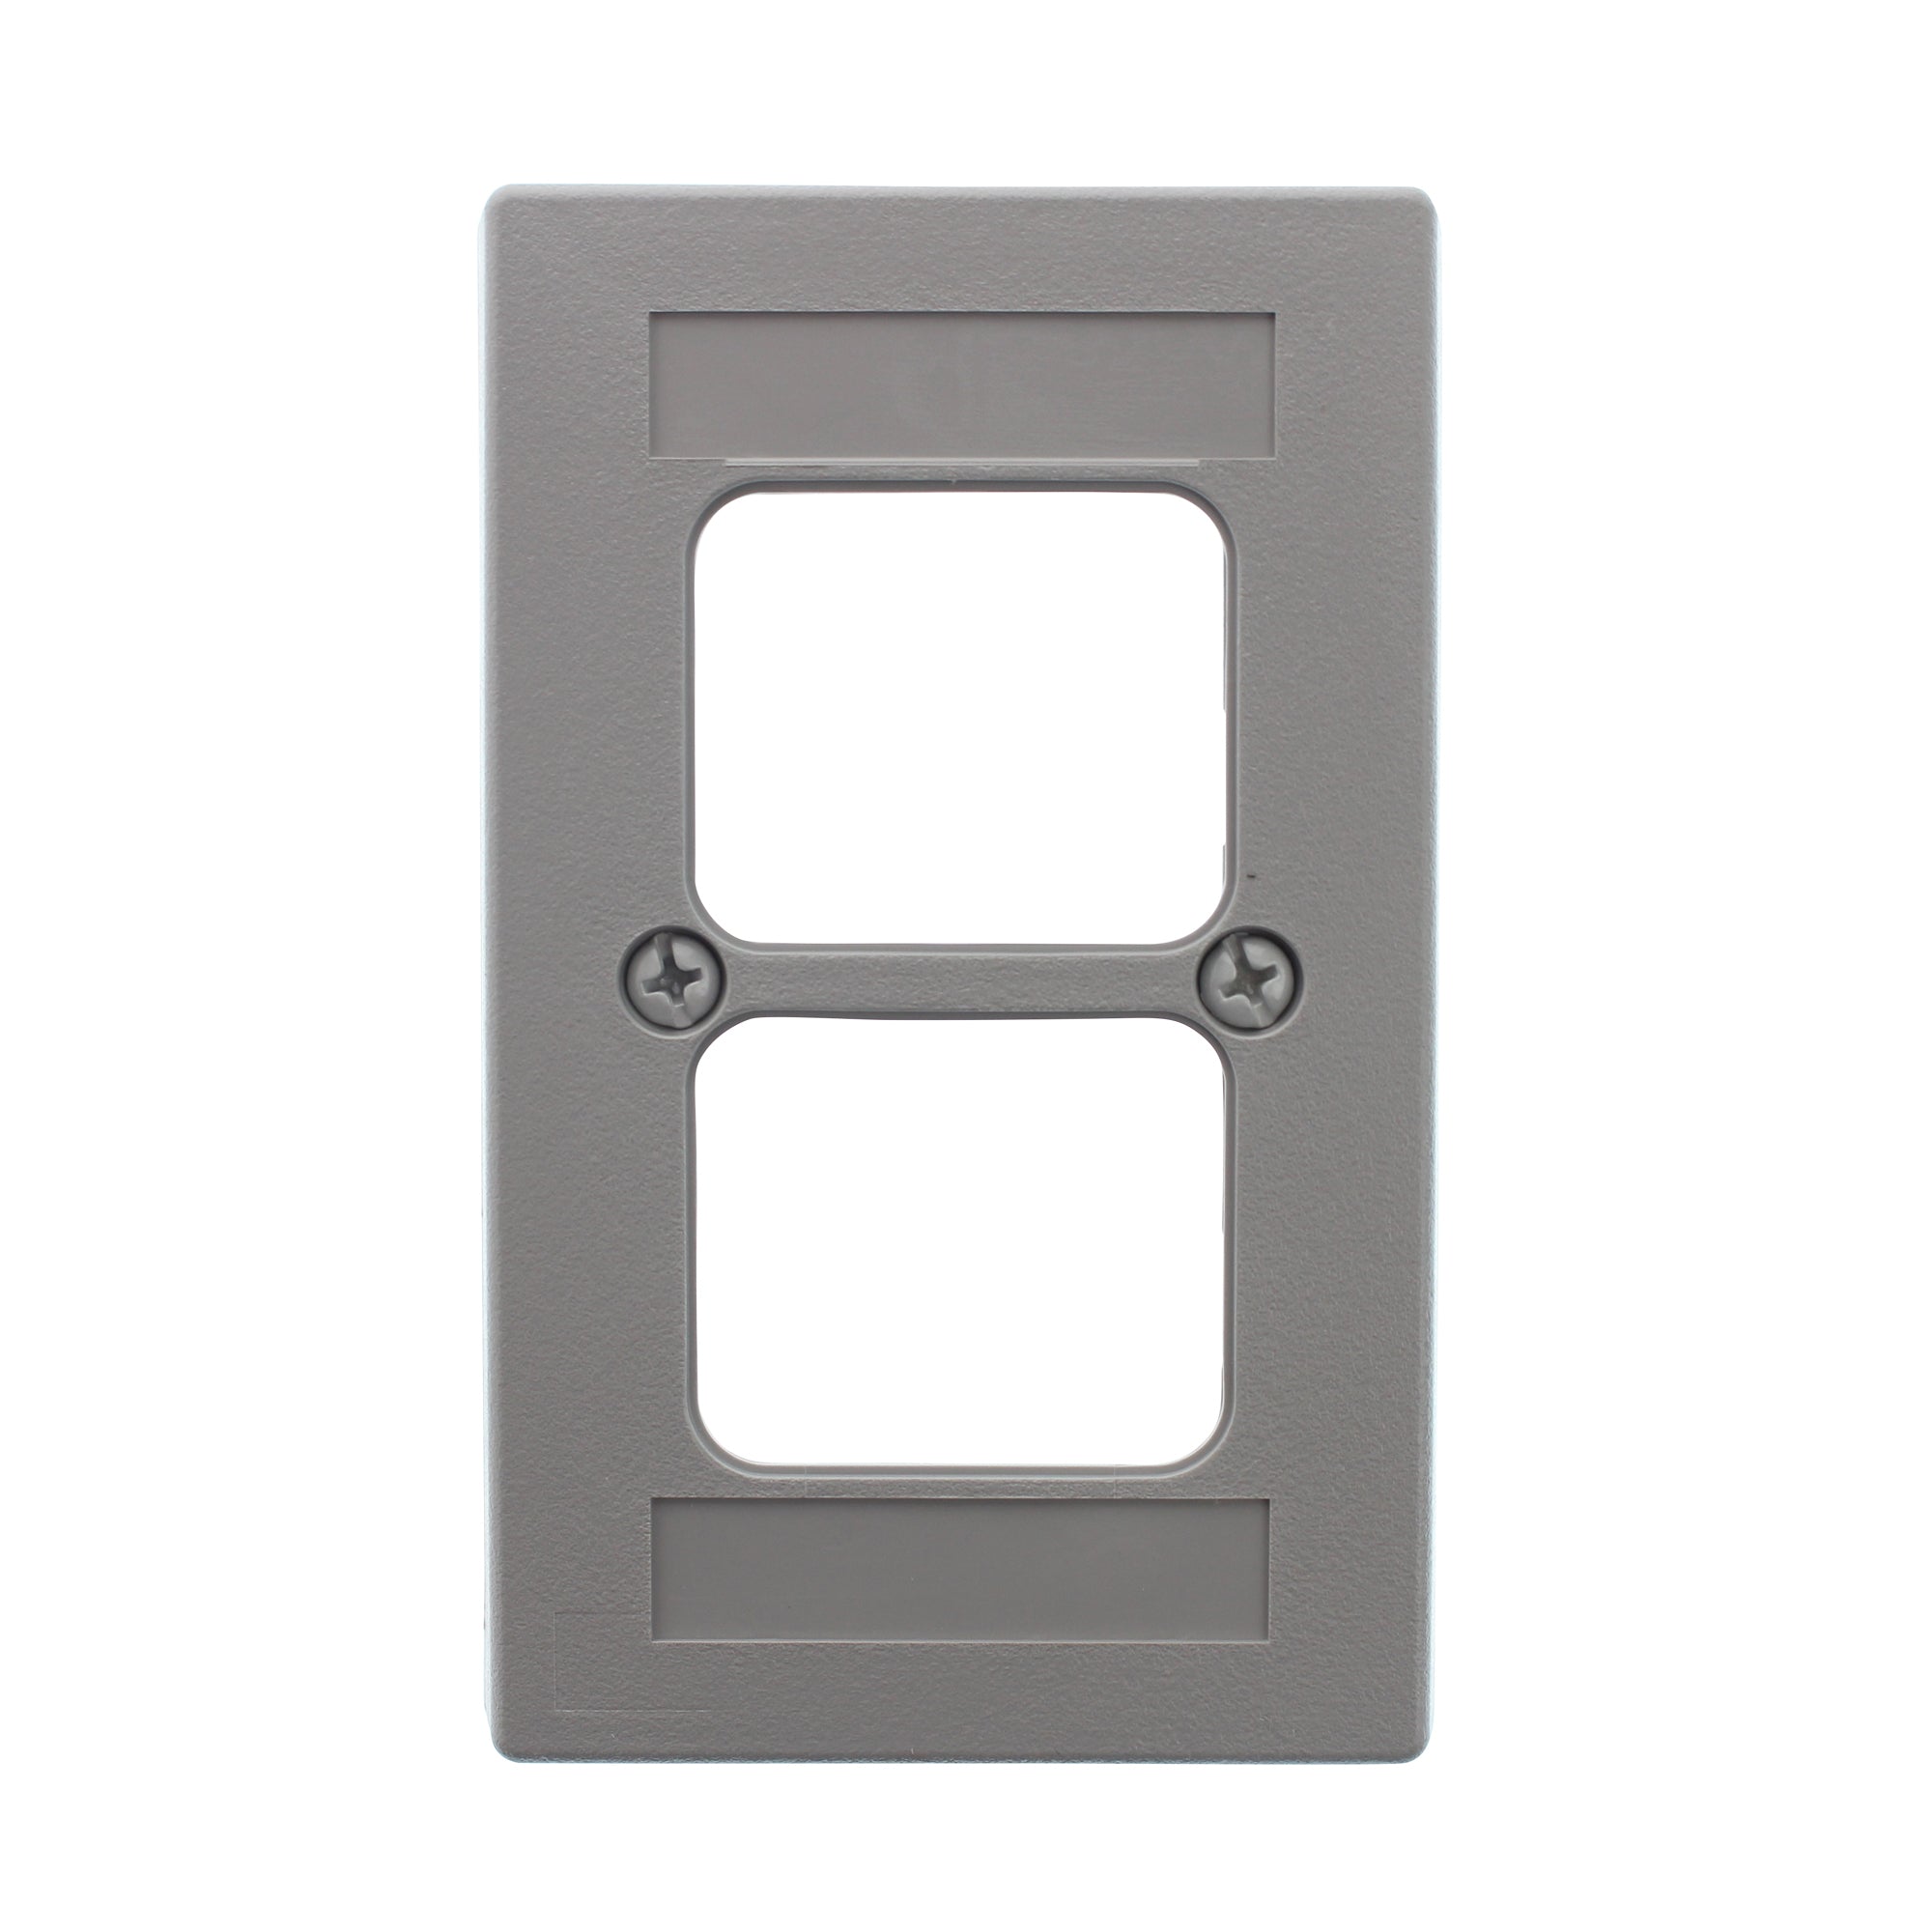 Amp / Tyco Eletronics, AMP TYCO TE 555650-4 WIRE DUCTING FACEPLATE KIT, 1-GANG, GRAY